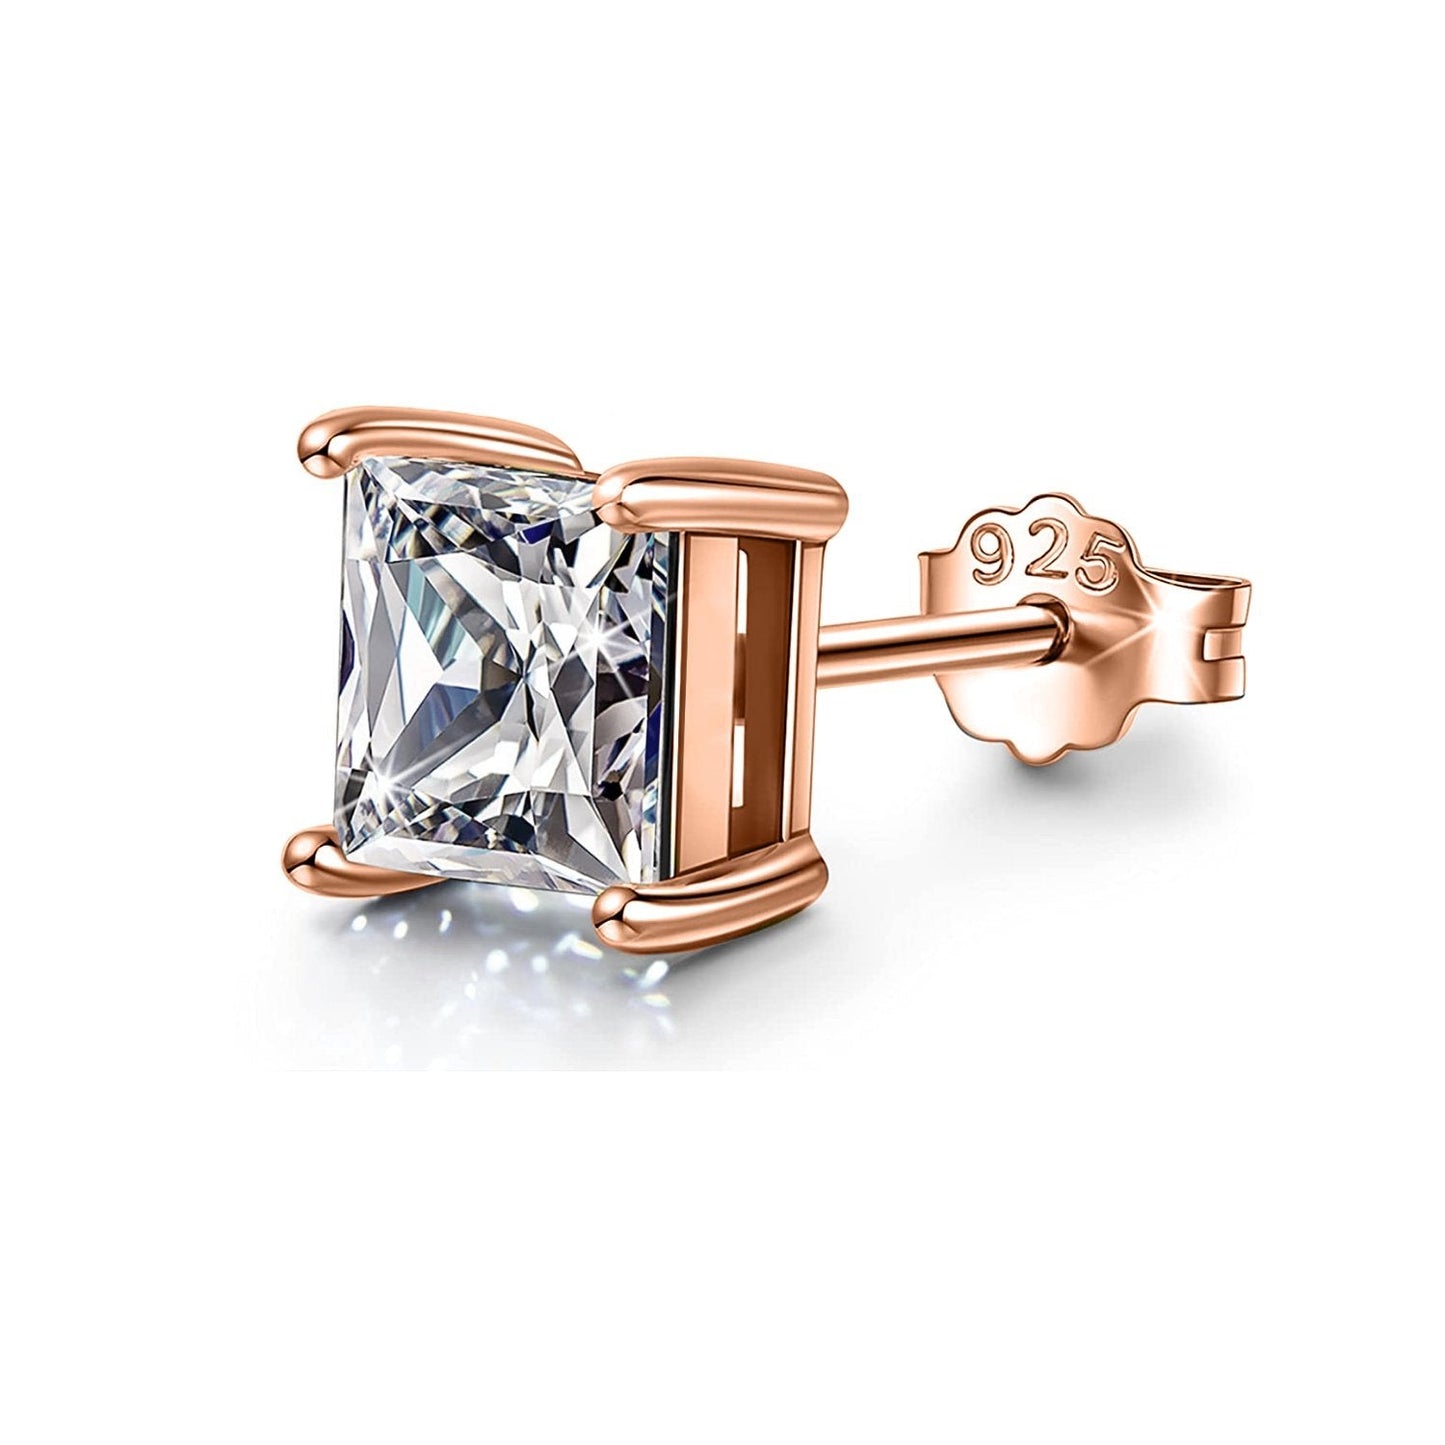 Mens Rose Gold Square Solitaire Earring embellished with Swarovski Zirconia - 92.5 Silver in 18K Rose Gold Finish